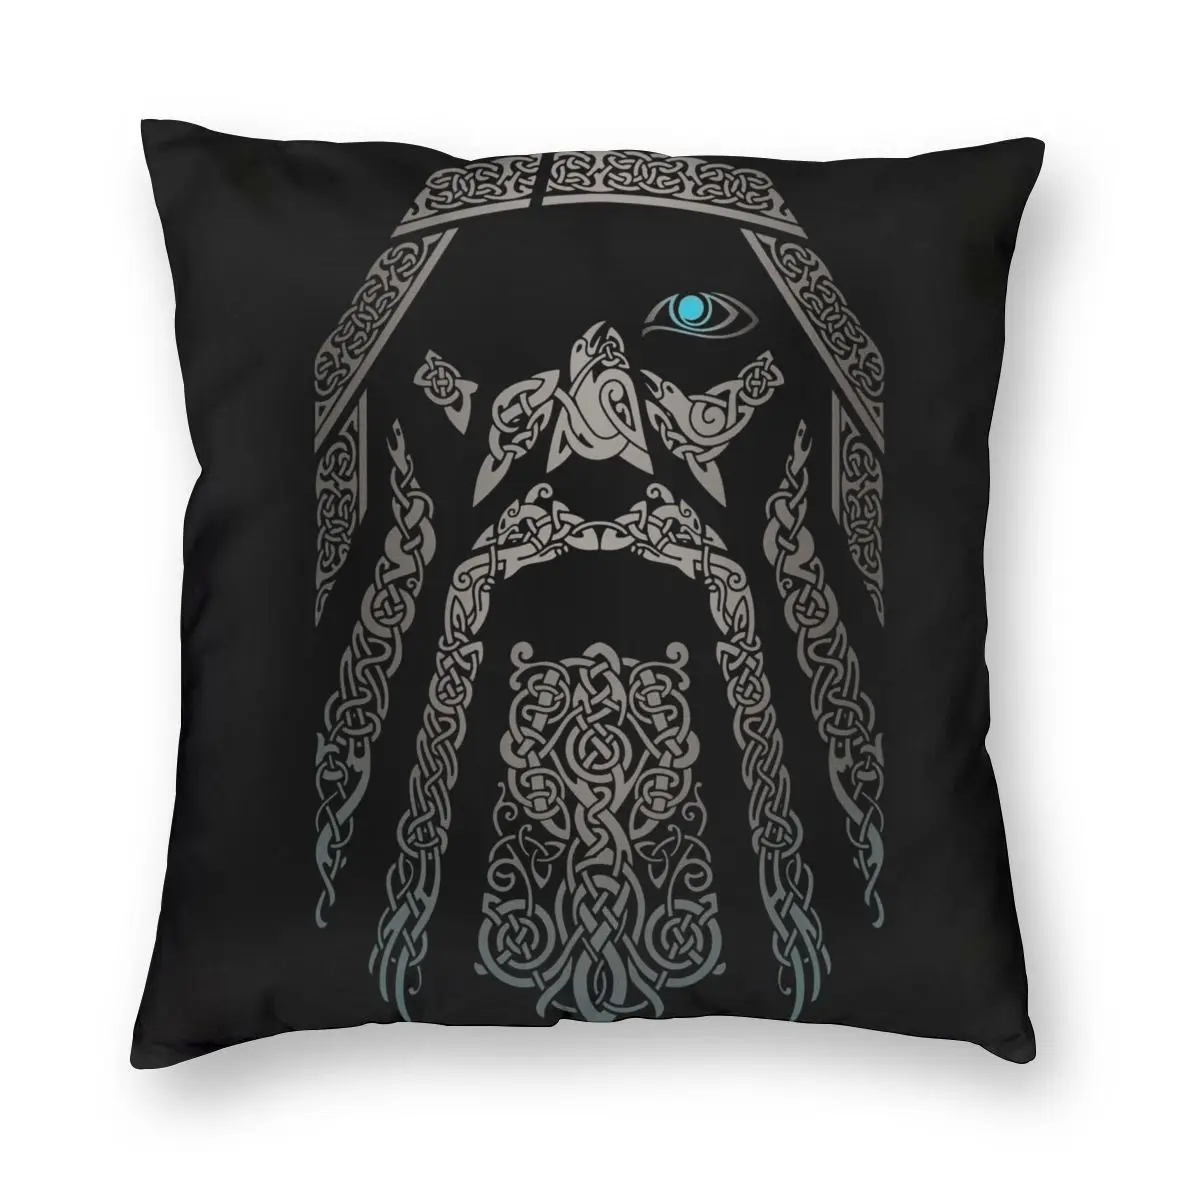 

ODIN Vikings Valhalla Son Of Odin Pillowcover Home Decor Cushion Cover Throw Pillow for Home Polyester Double-sided Printing